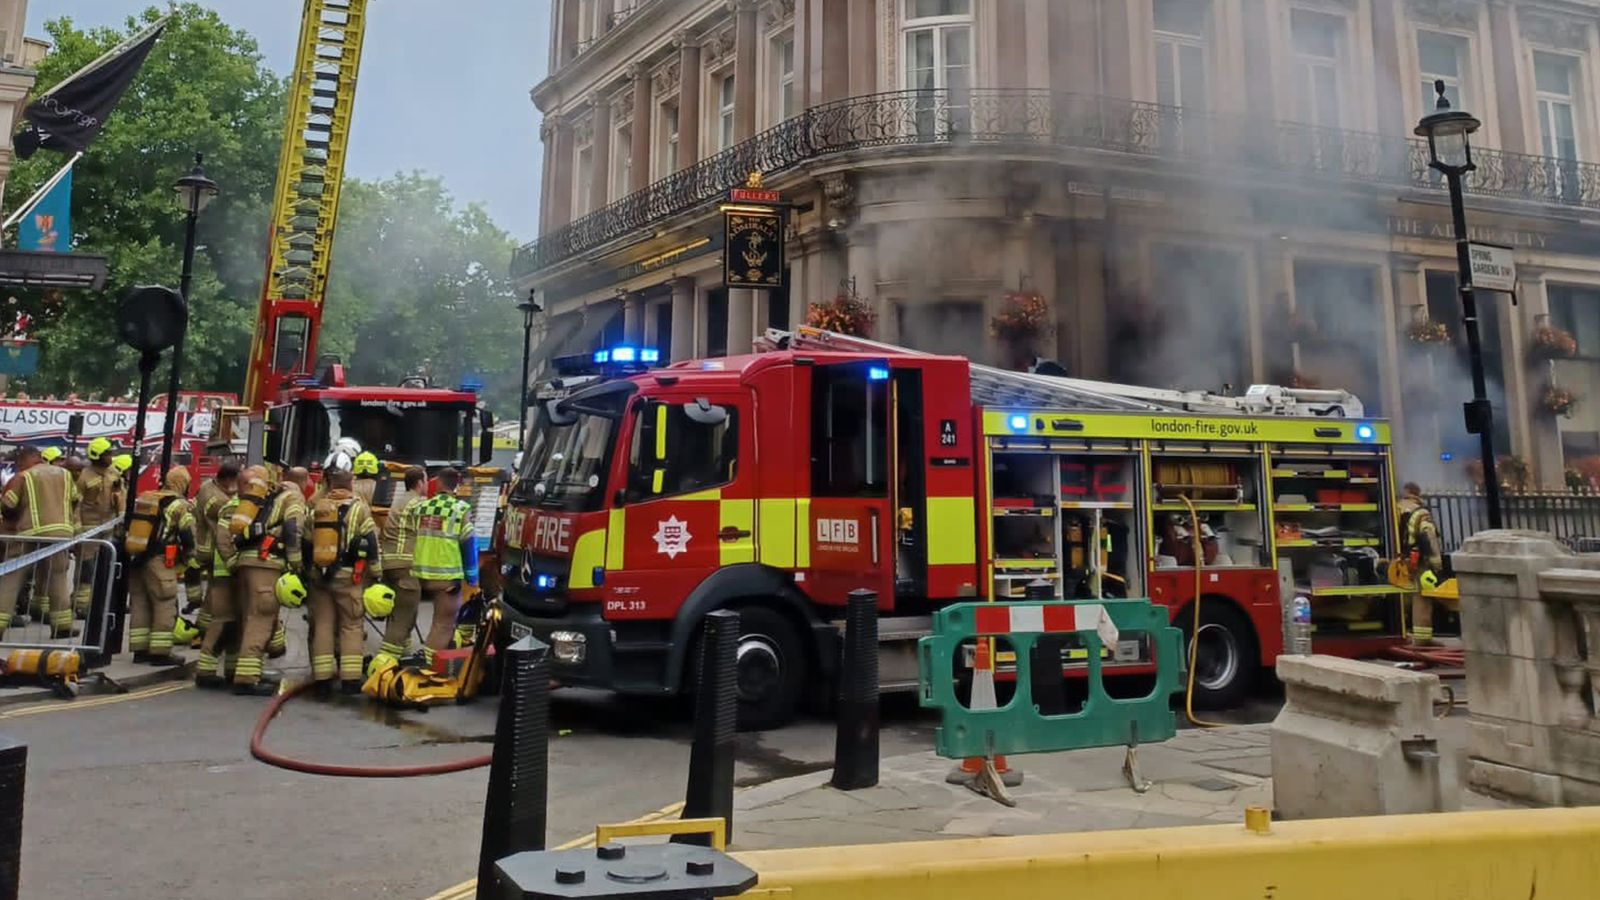 London Fire Brigade is 'institutionally misogynist and racist', independent review finds